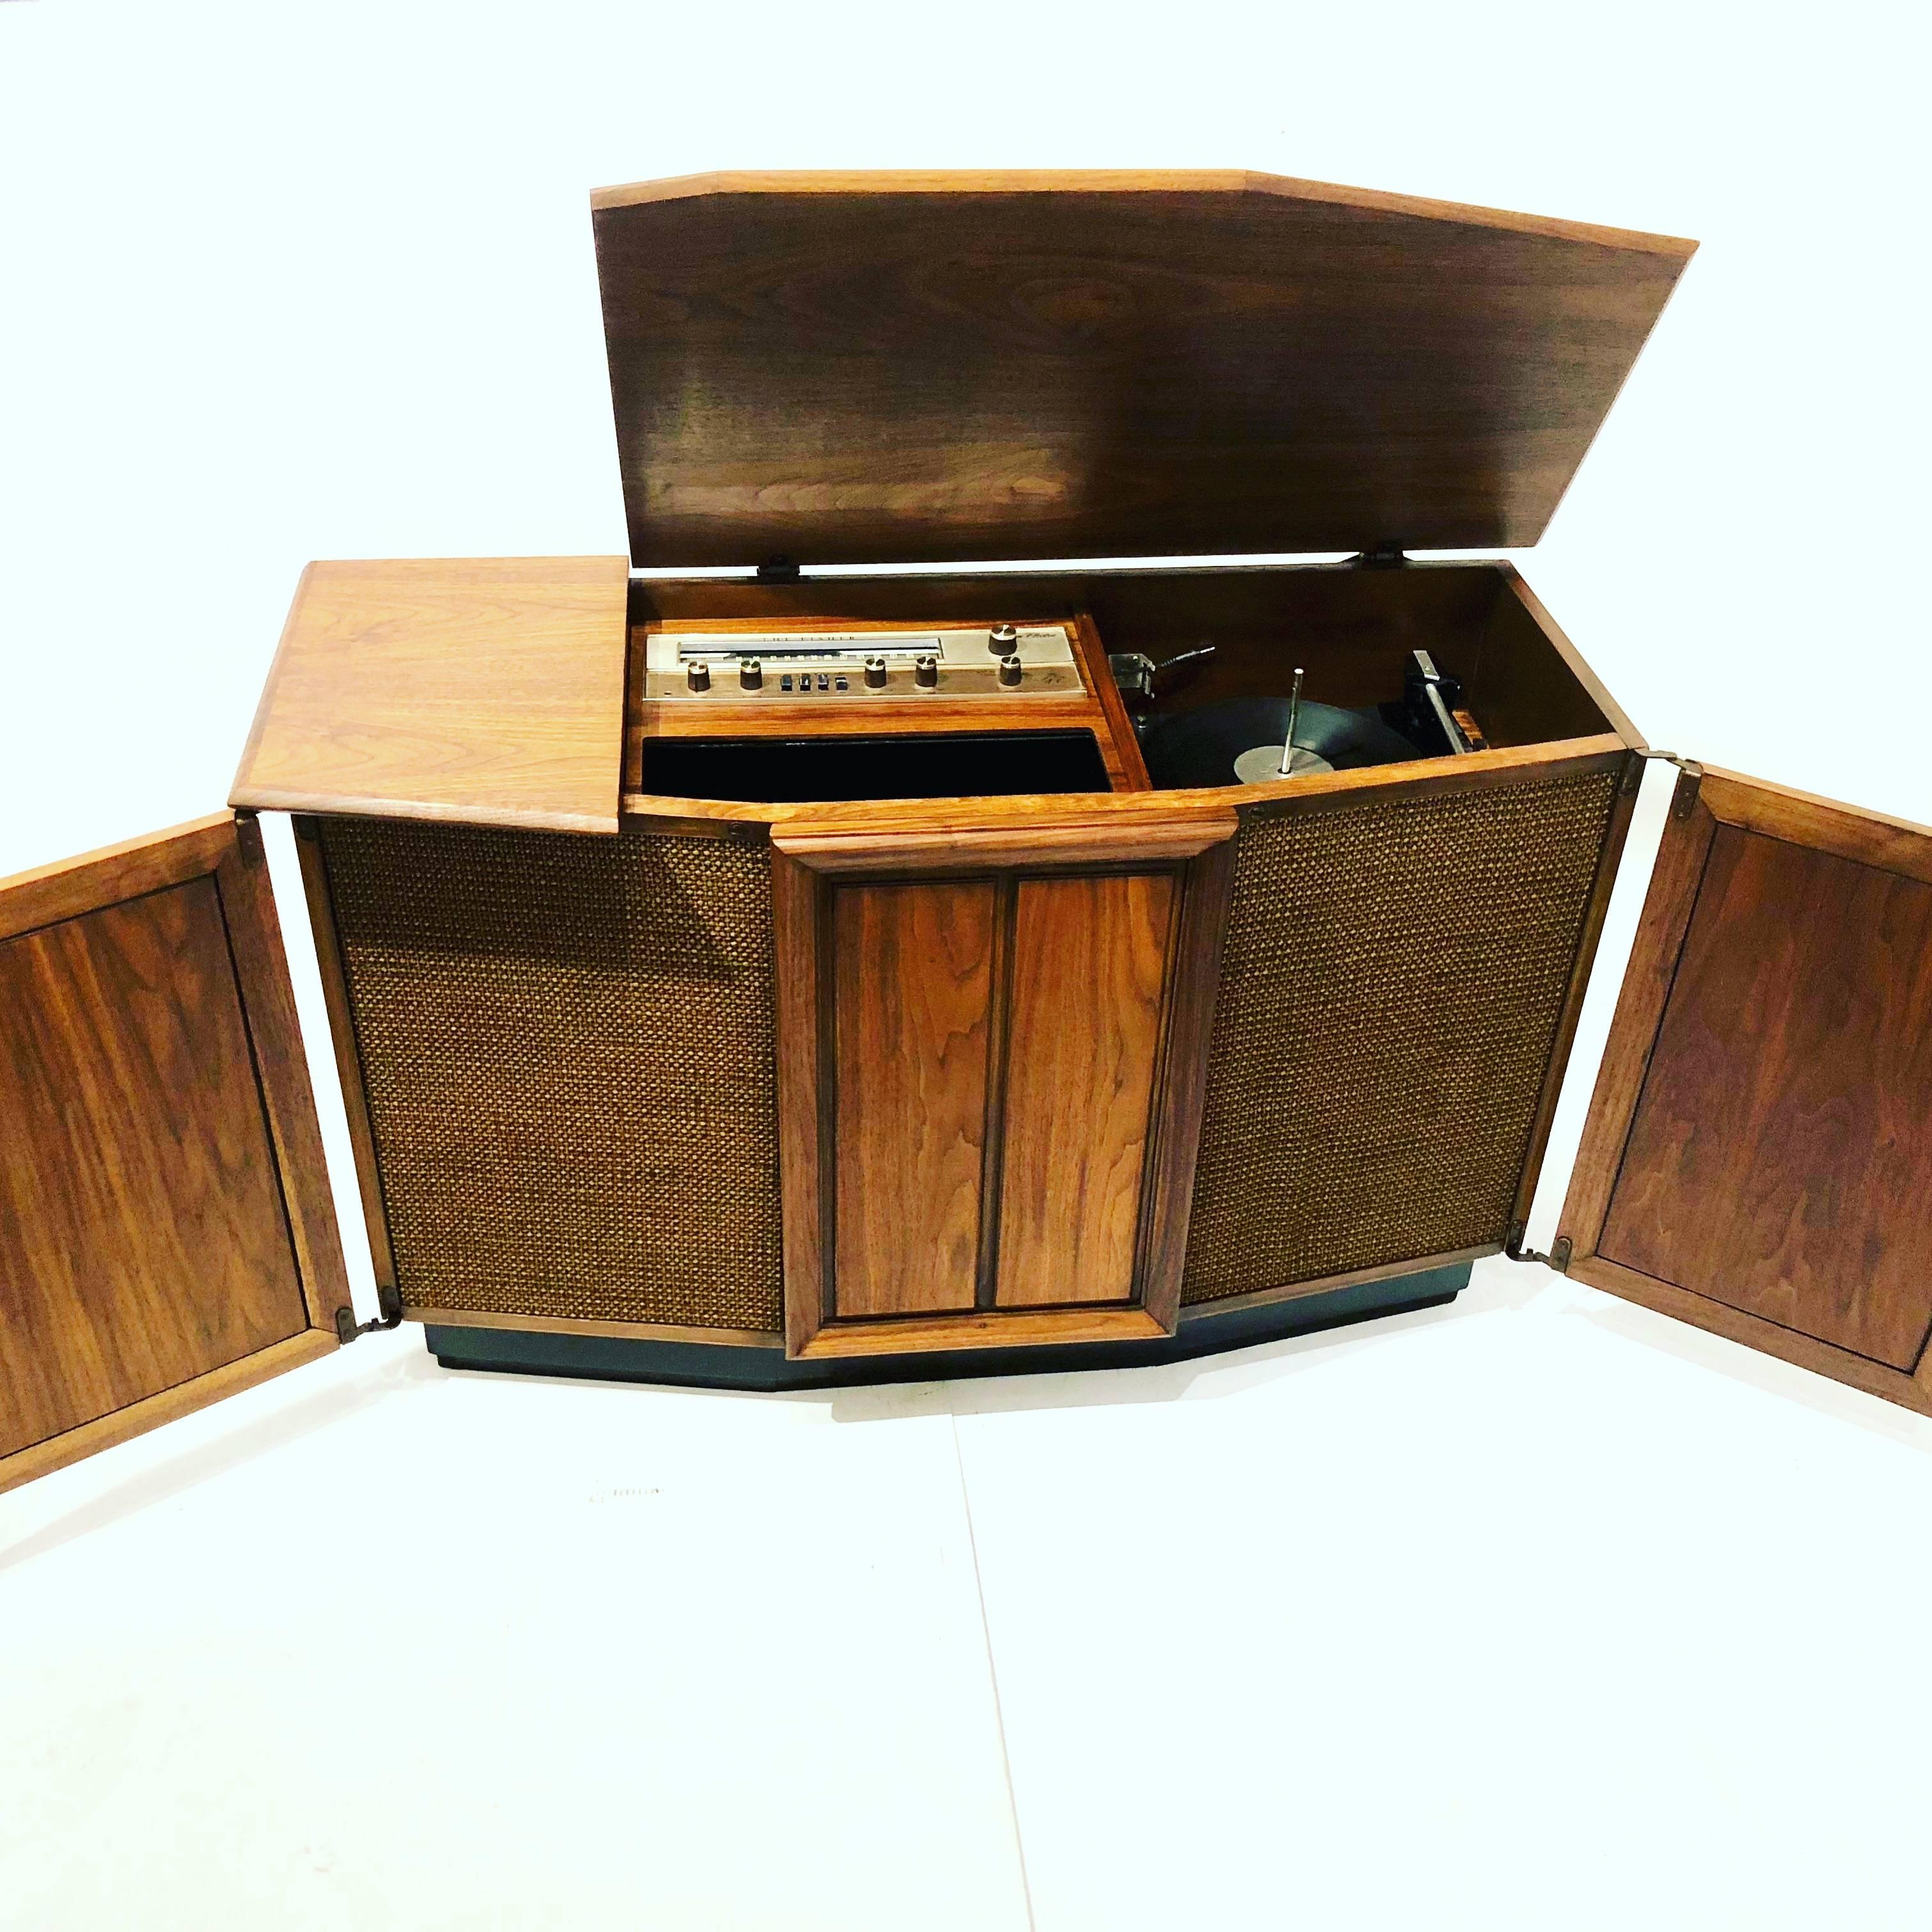 Striking Small American Midcentury Walnut Console Stereo Cabinet by The Fisher 1